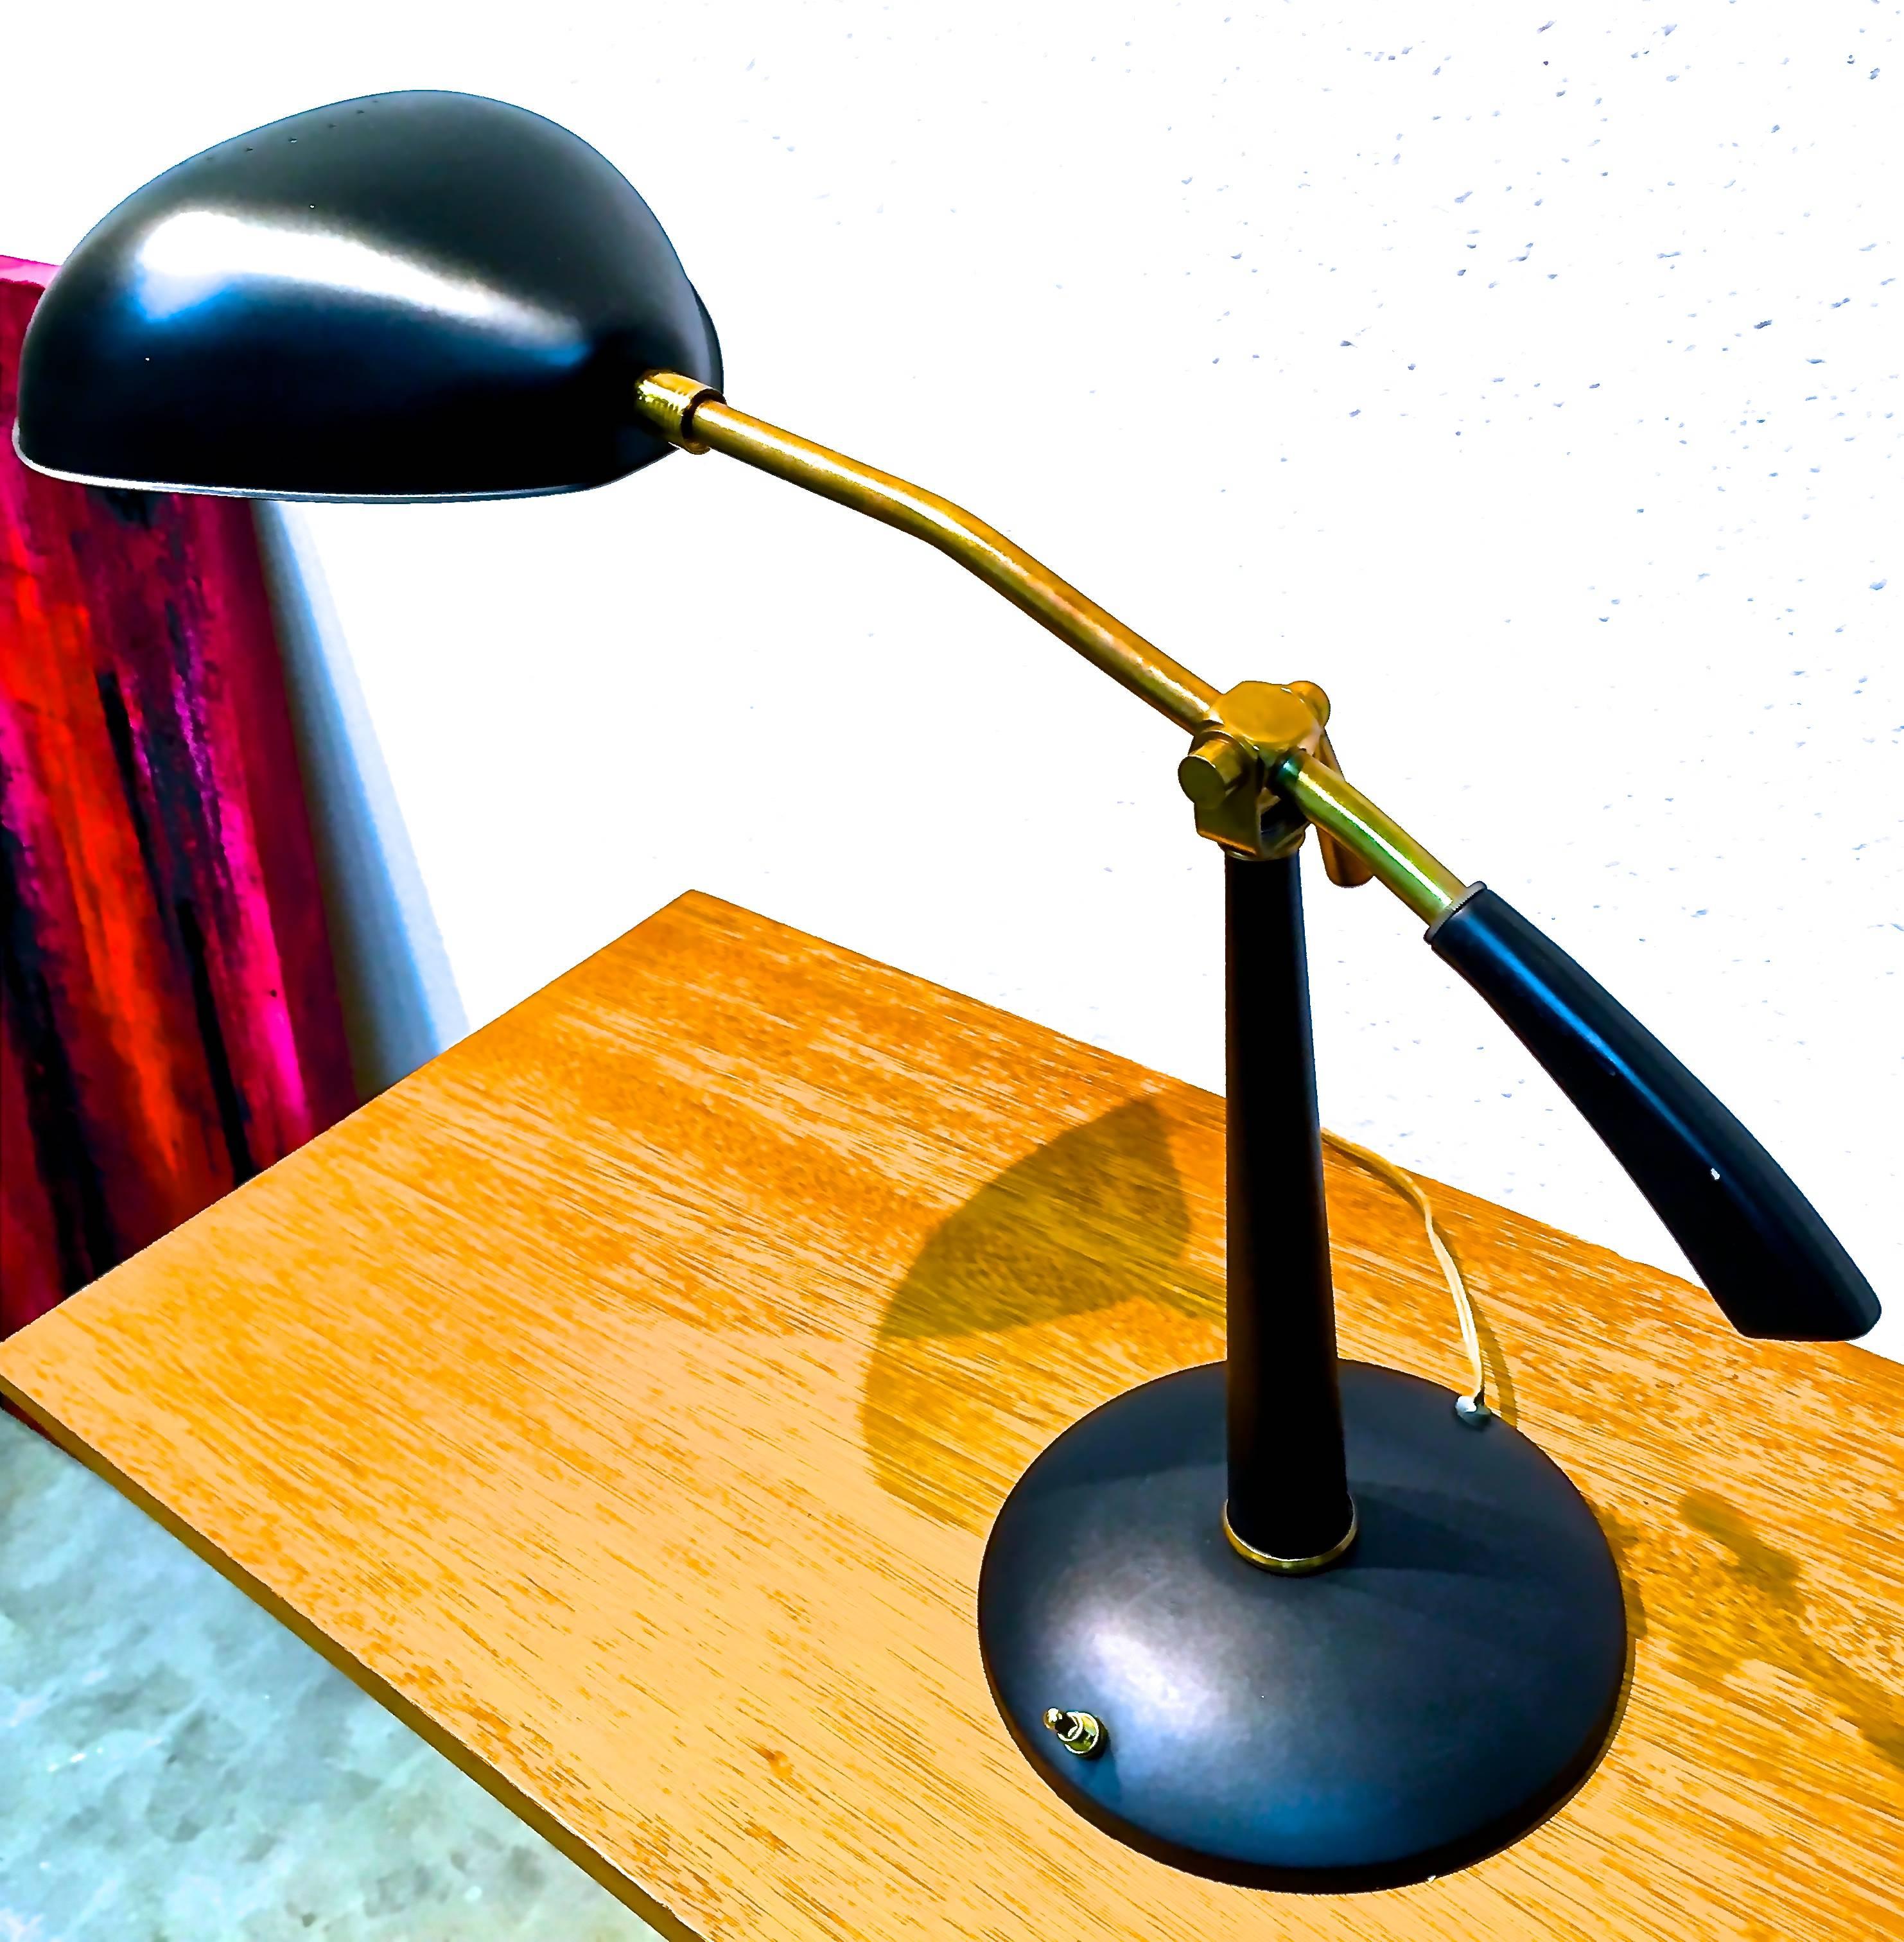 Attributed to Greta Grossman this handsome lamp has a brass arm and detailing with a satin black 